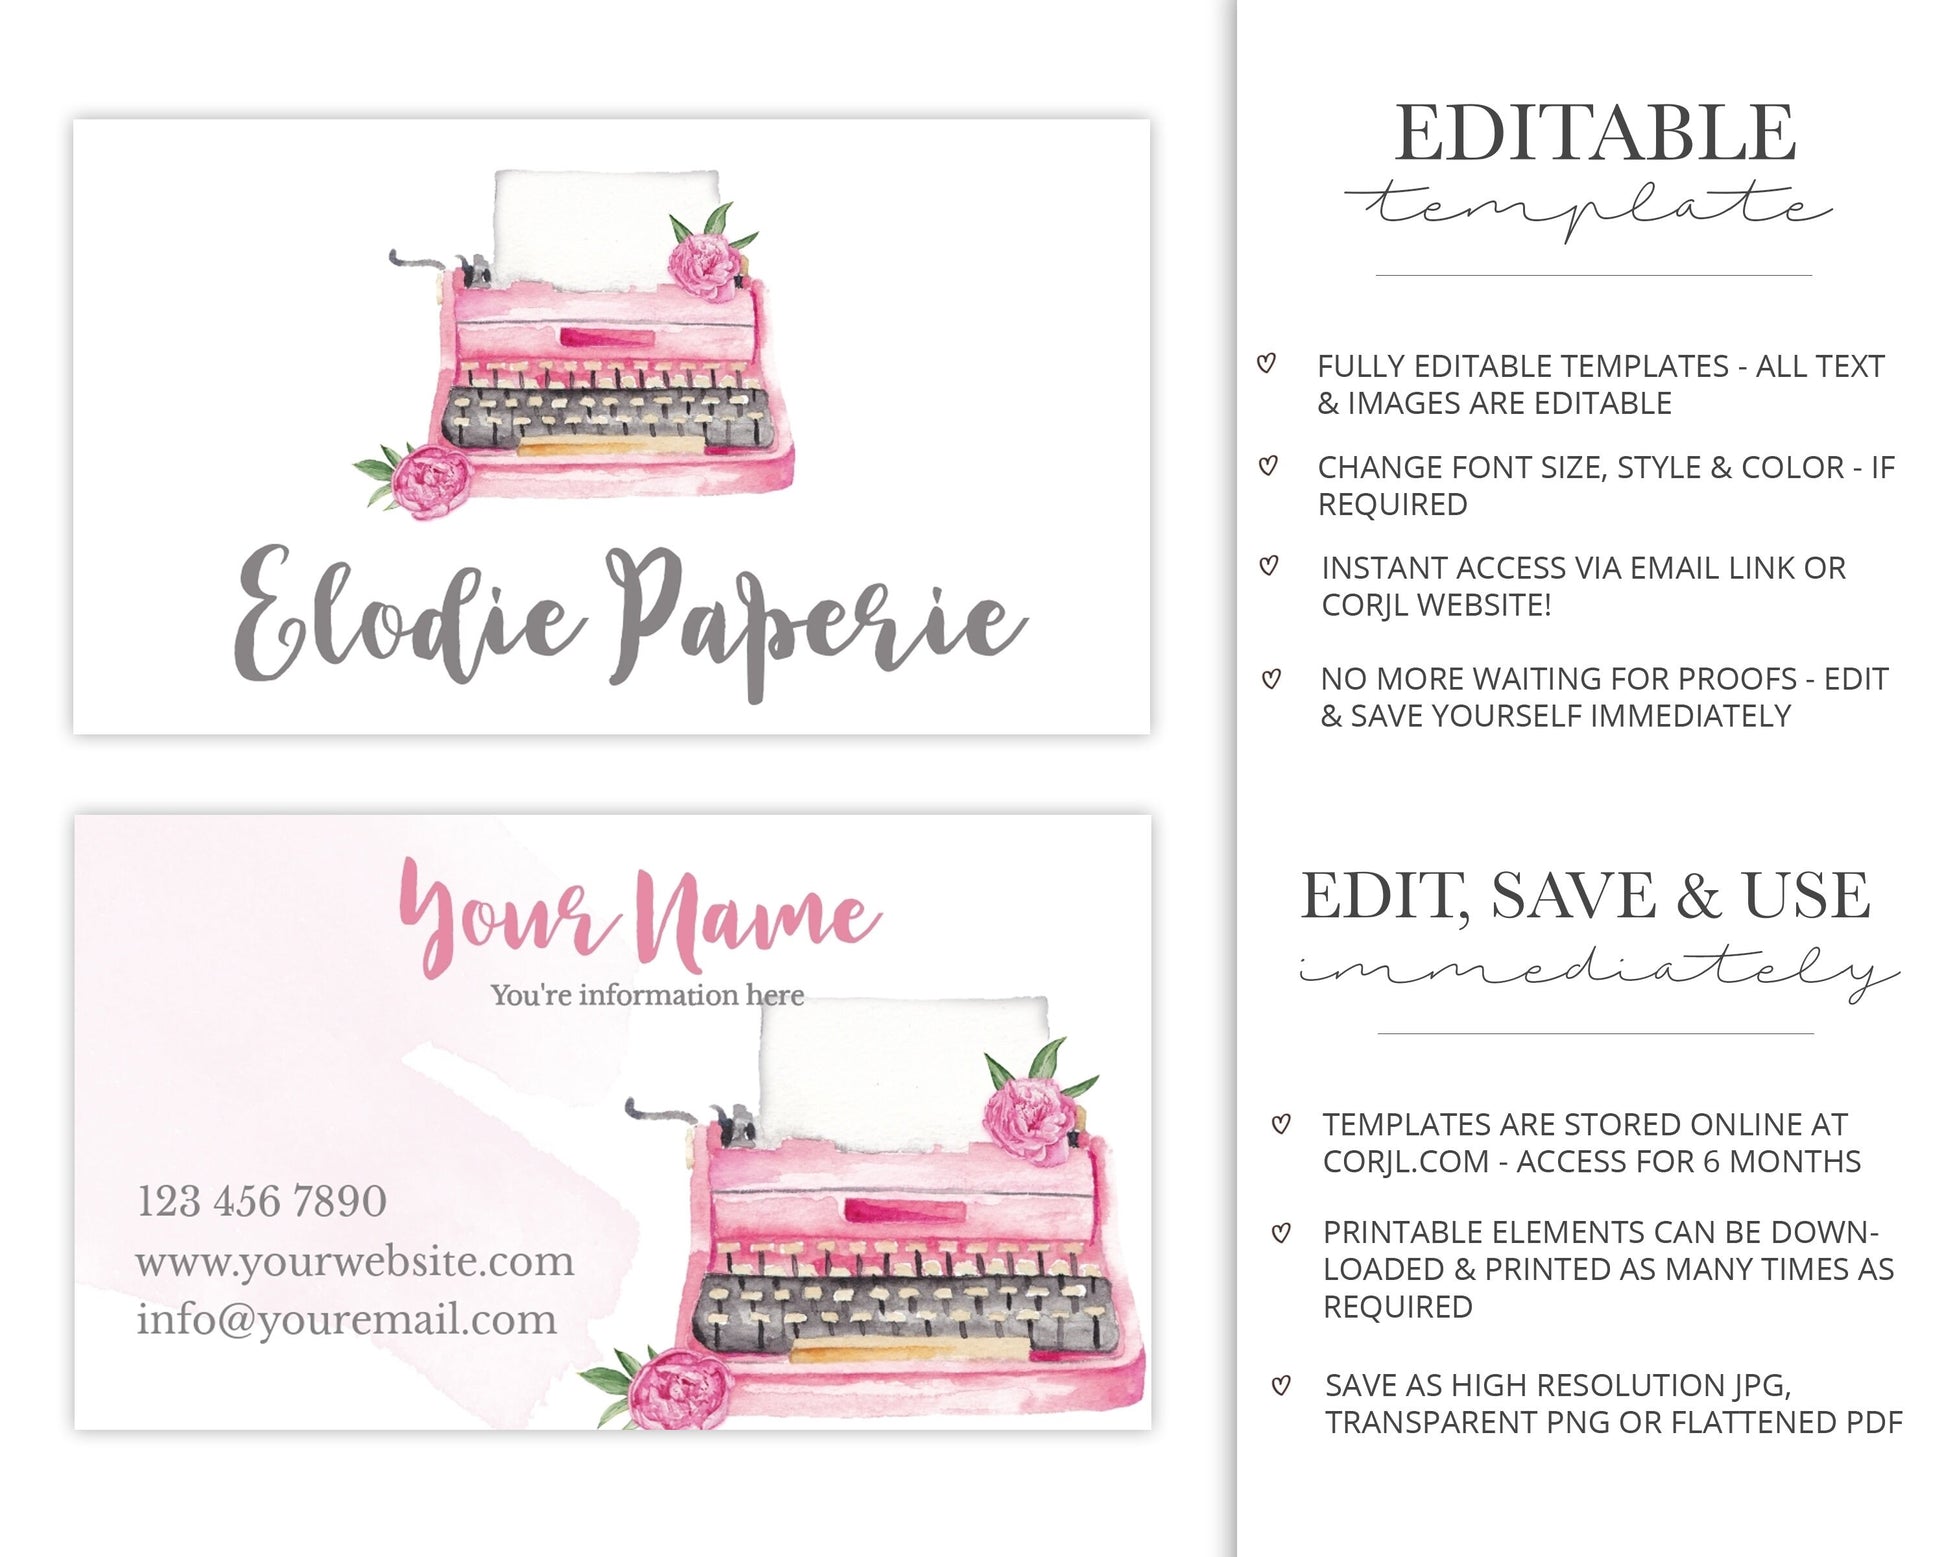 Editable 8pc Maxi Branding Kit Instant Download Watercolor Typewriter Paperie Design | DIY Editable Template | Premade Business logo EP-001